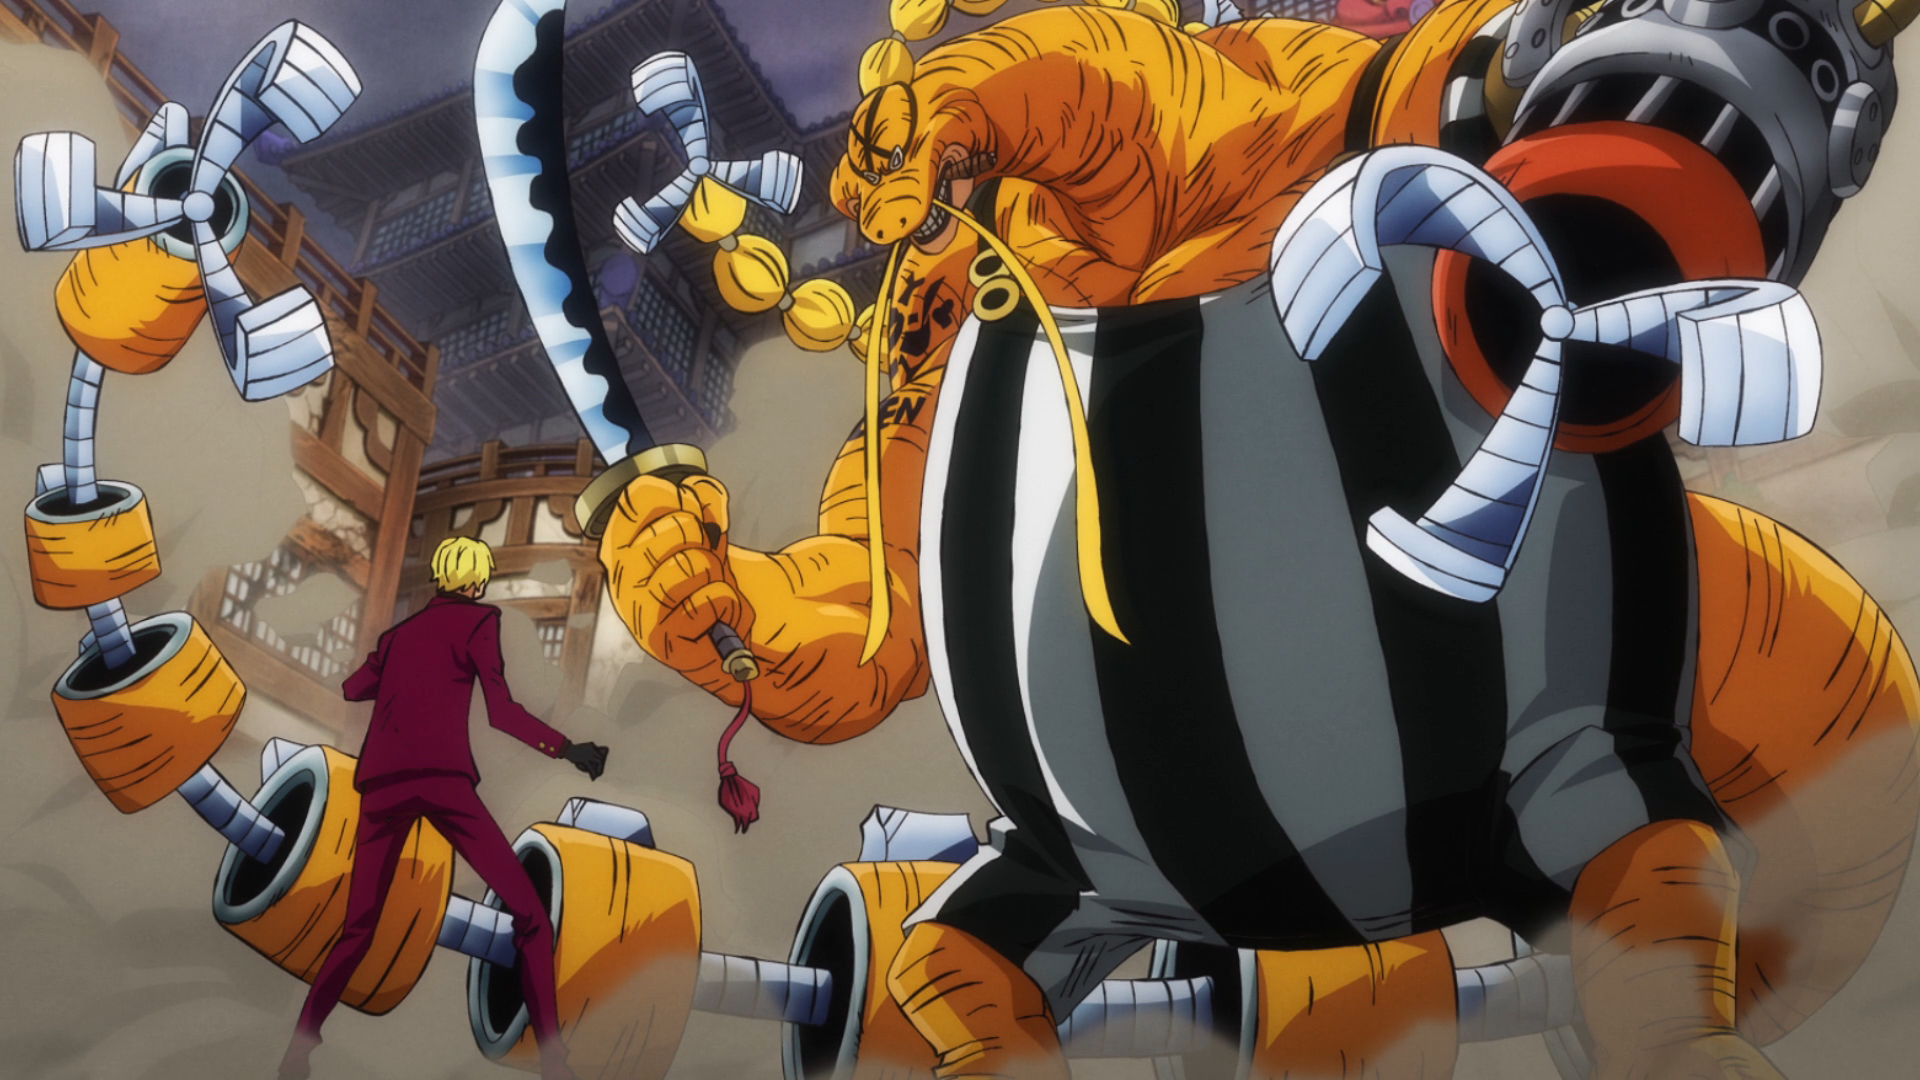 One Piece: Why King is much stronger than Queen, explained